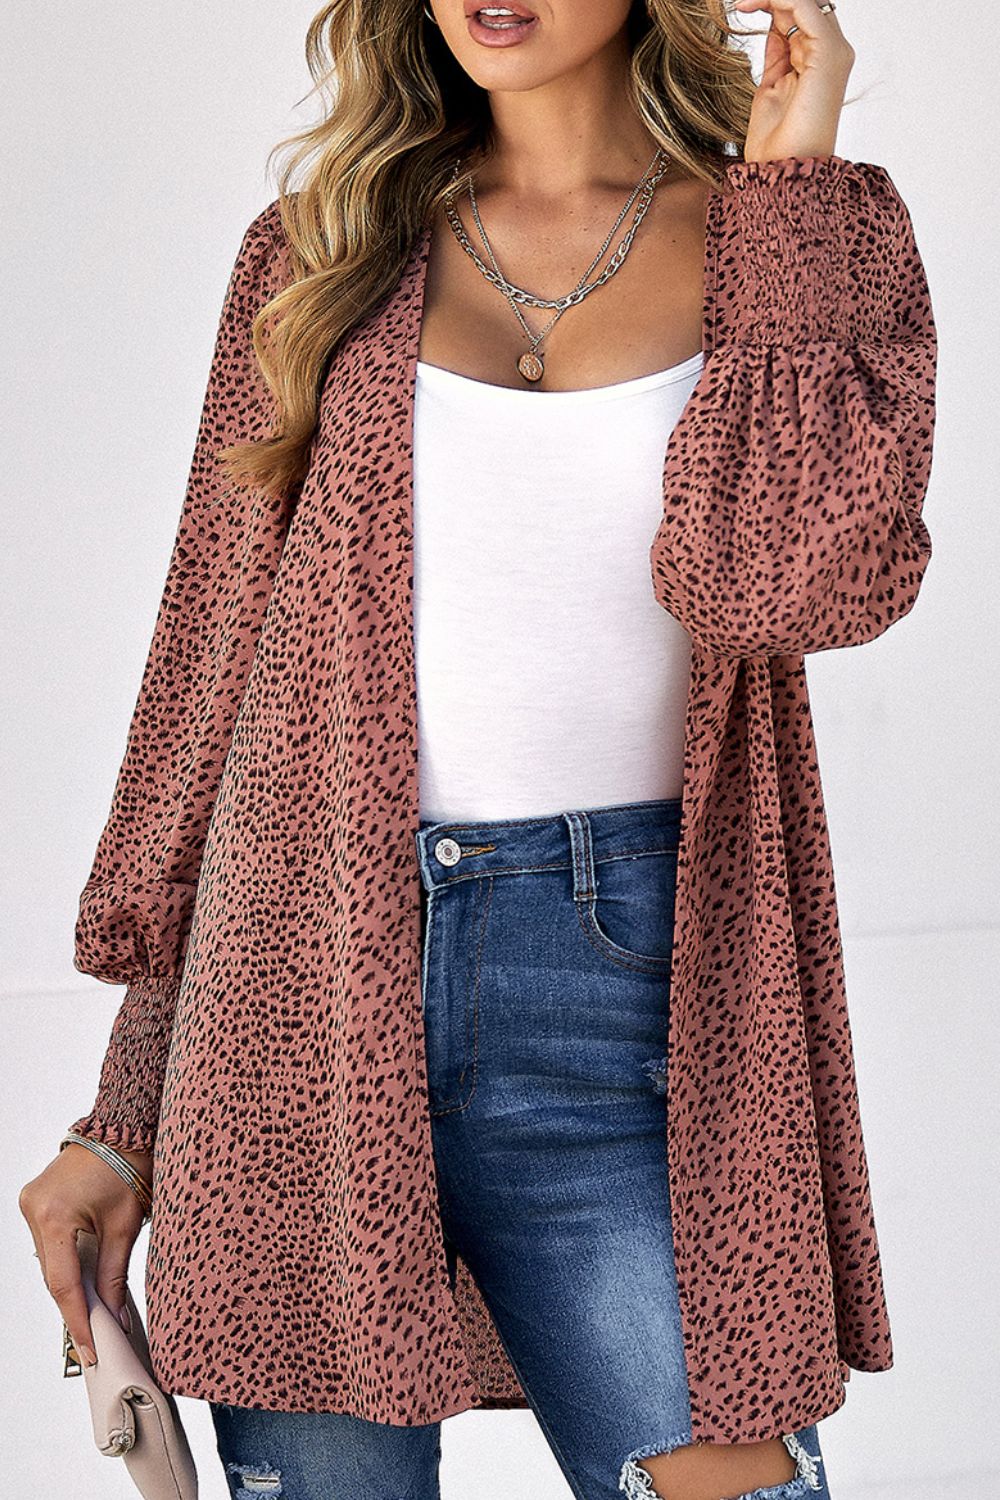 Leopard Print Balloon Sleeve Cardigan - Red / S - Women’s Clothing & Accessories - Shirts & Tops - 4 - 2024